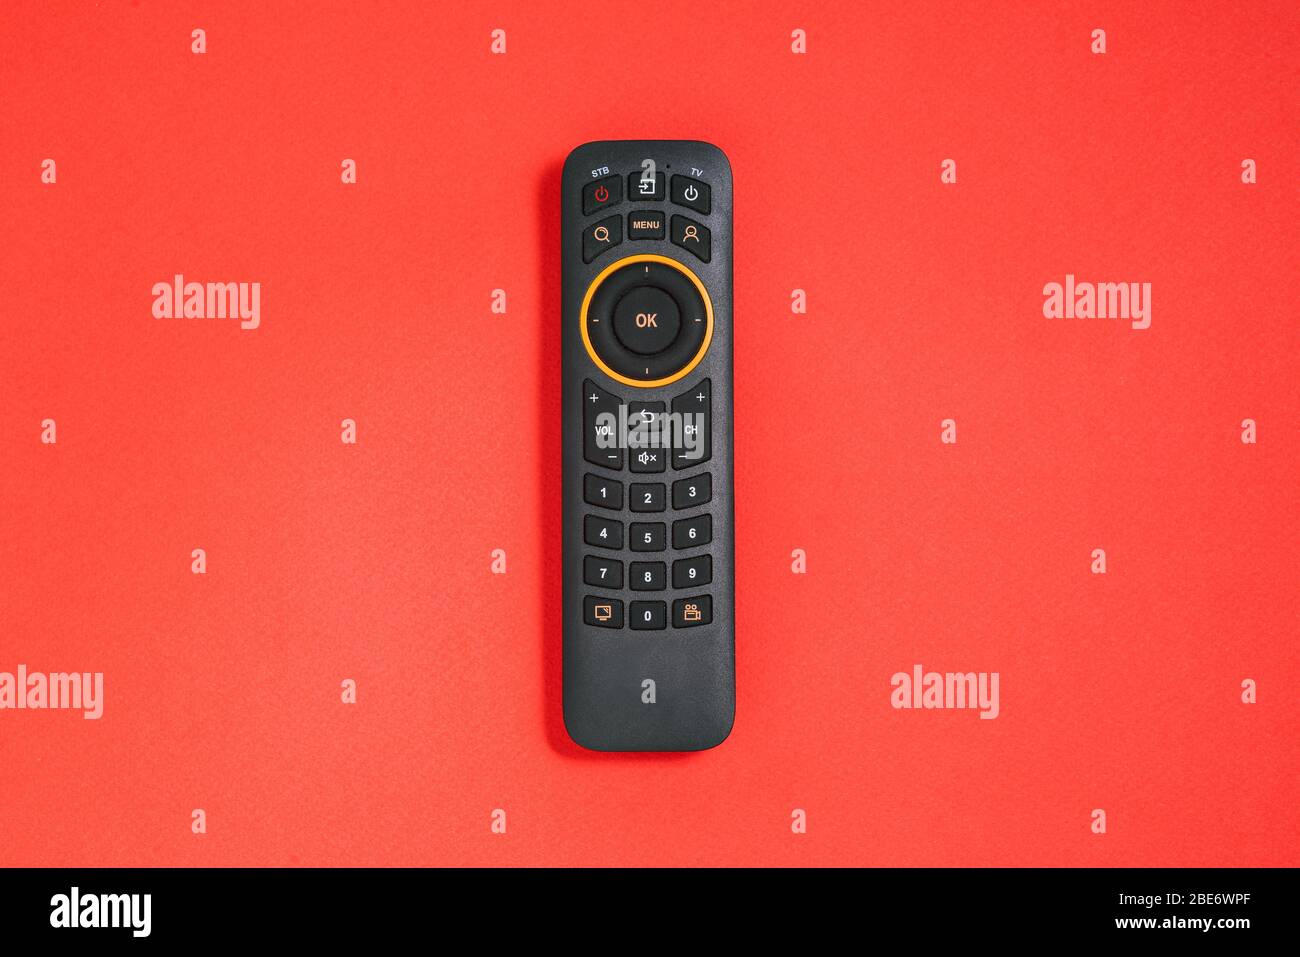 Remote control with buttons on a red background. Smart TV concept. Home entertainment Stock Photo